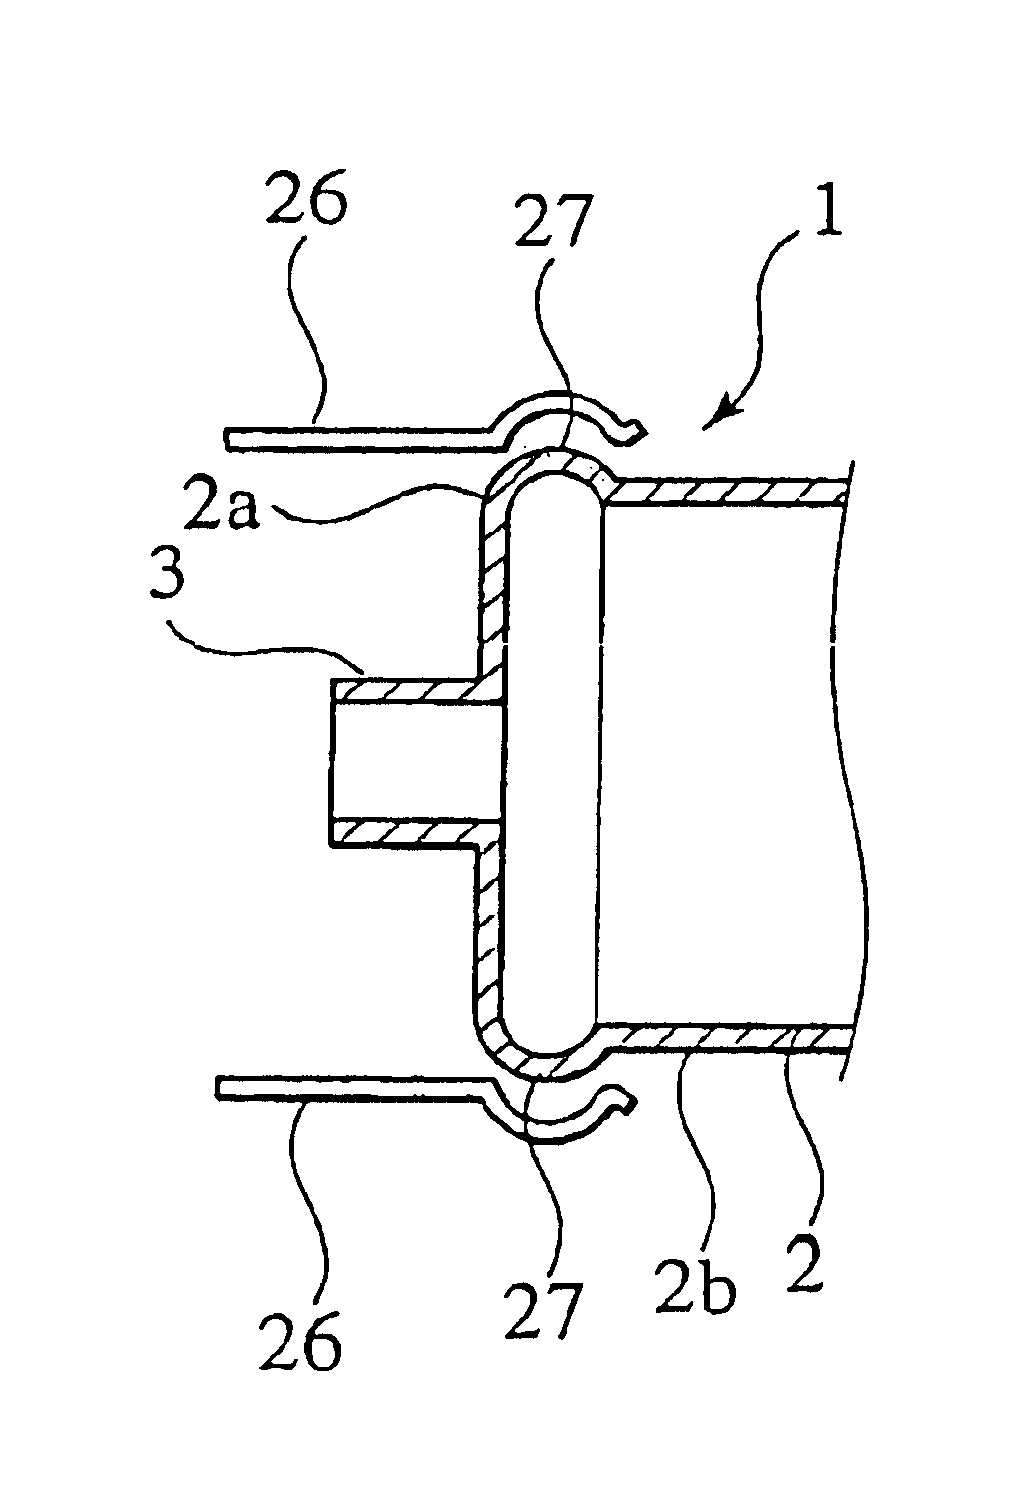 Ink bottle mounting apparatus and ink bottle for the apparatus